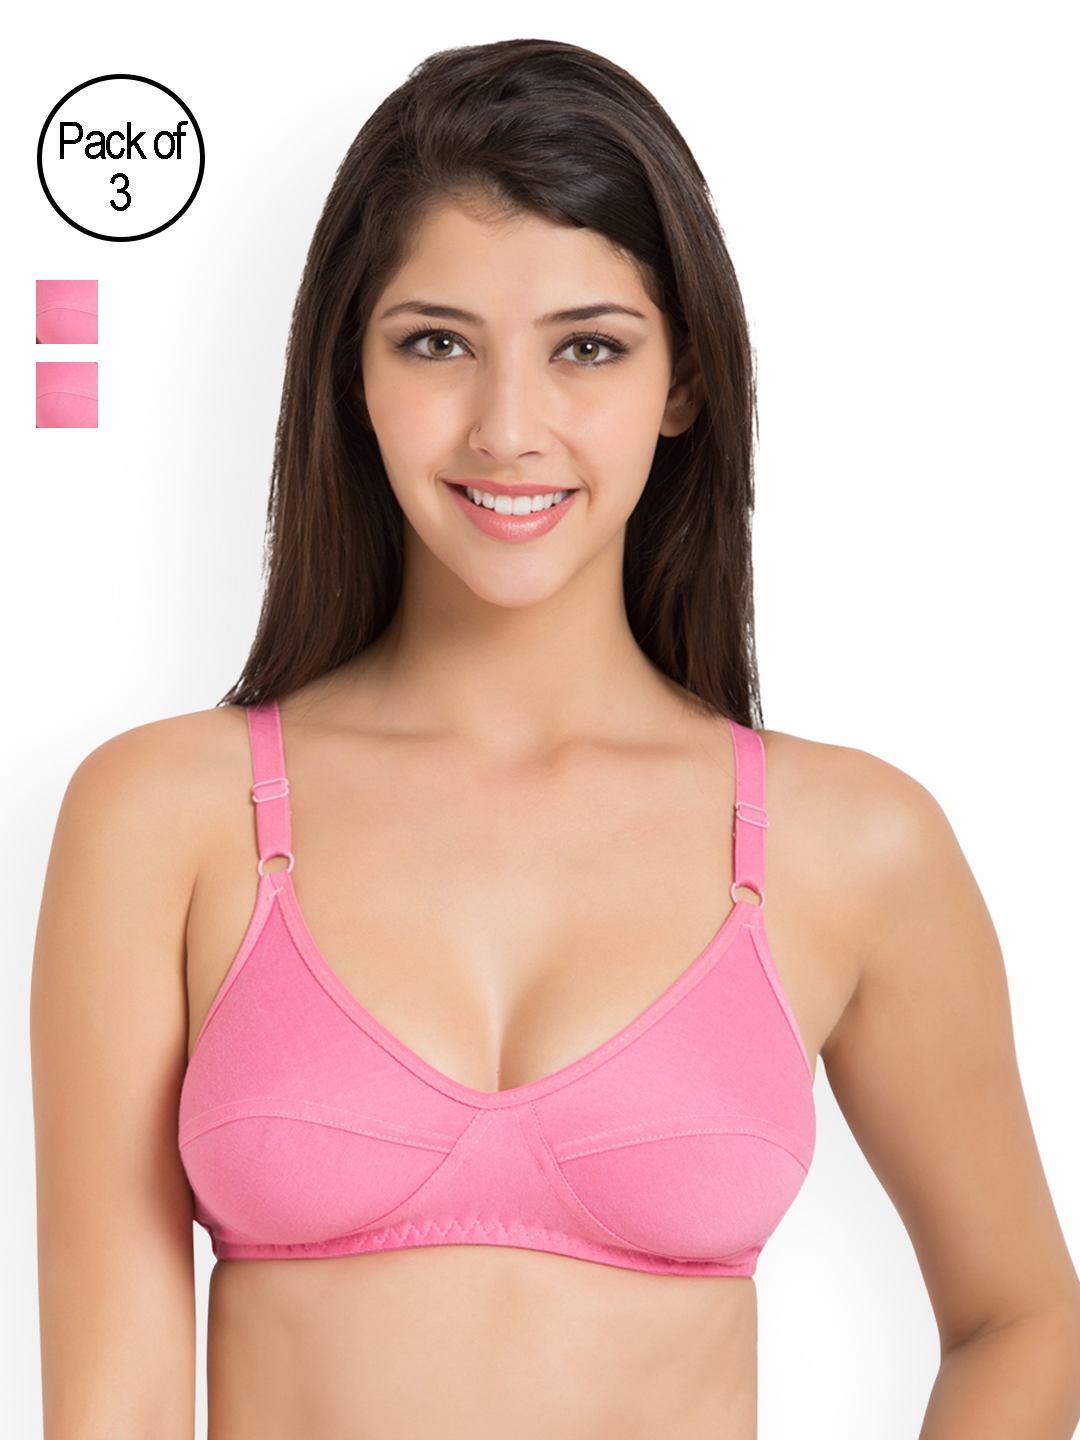 Buy Souminie Pack Of 3 Non Padded Soft Fit Cotton Bras SLY935 3PC